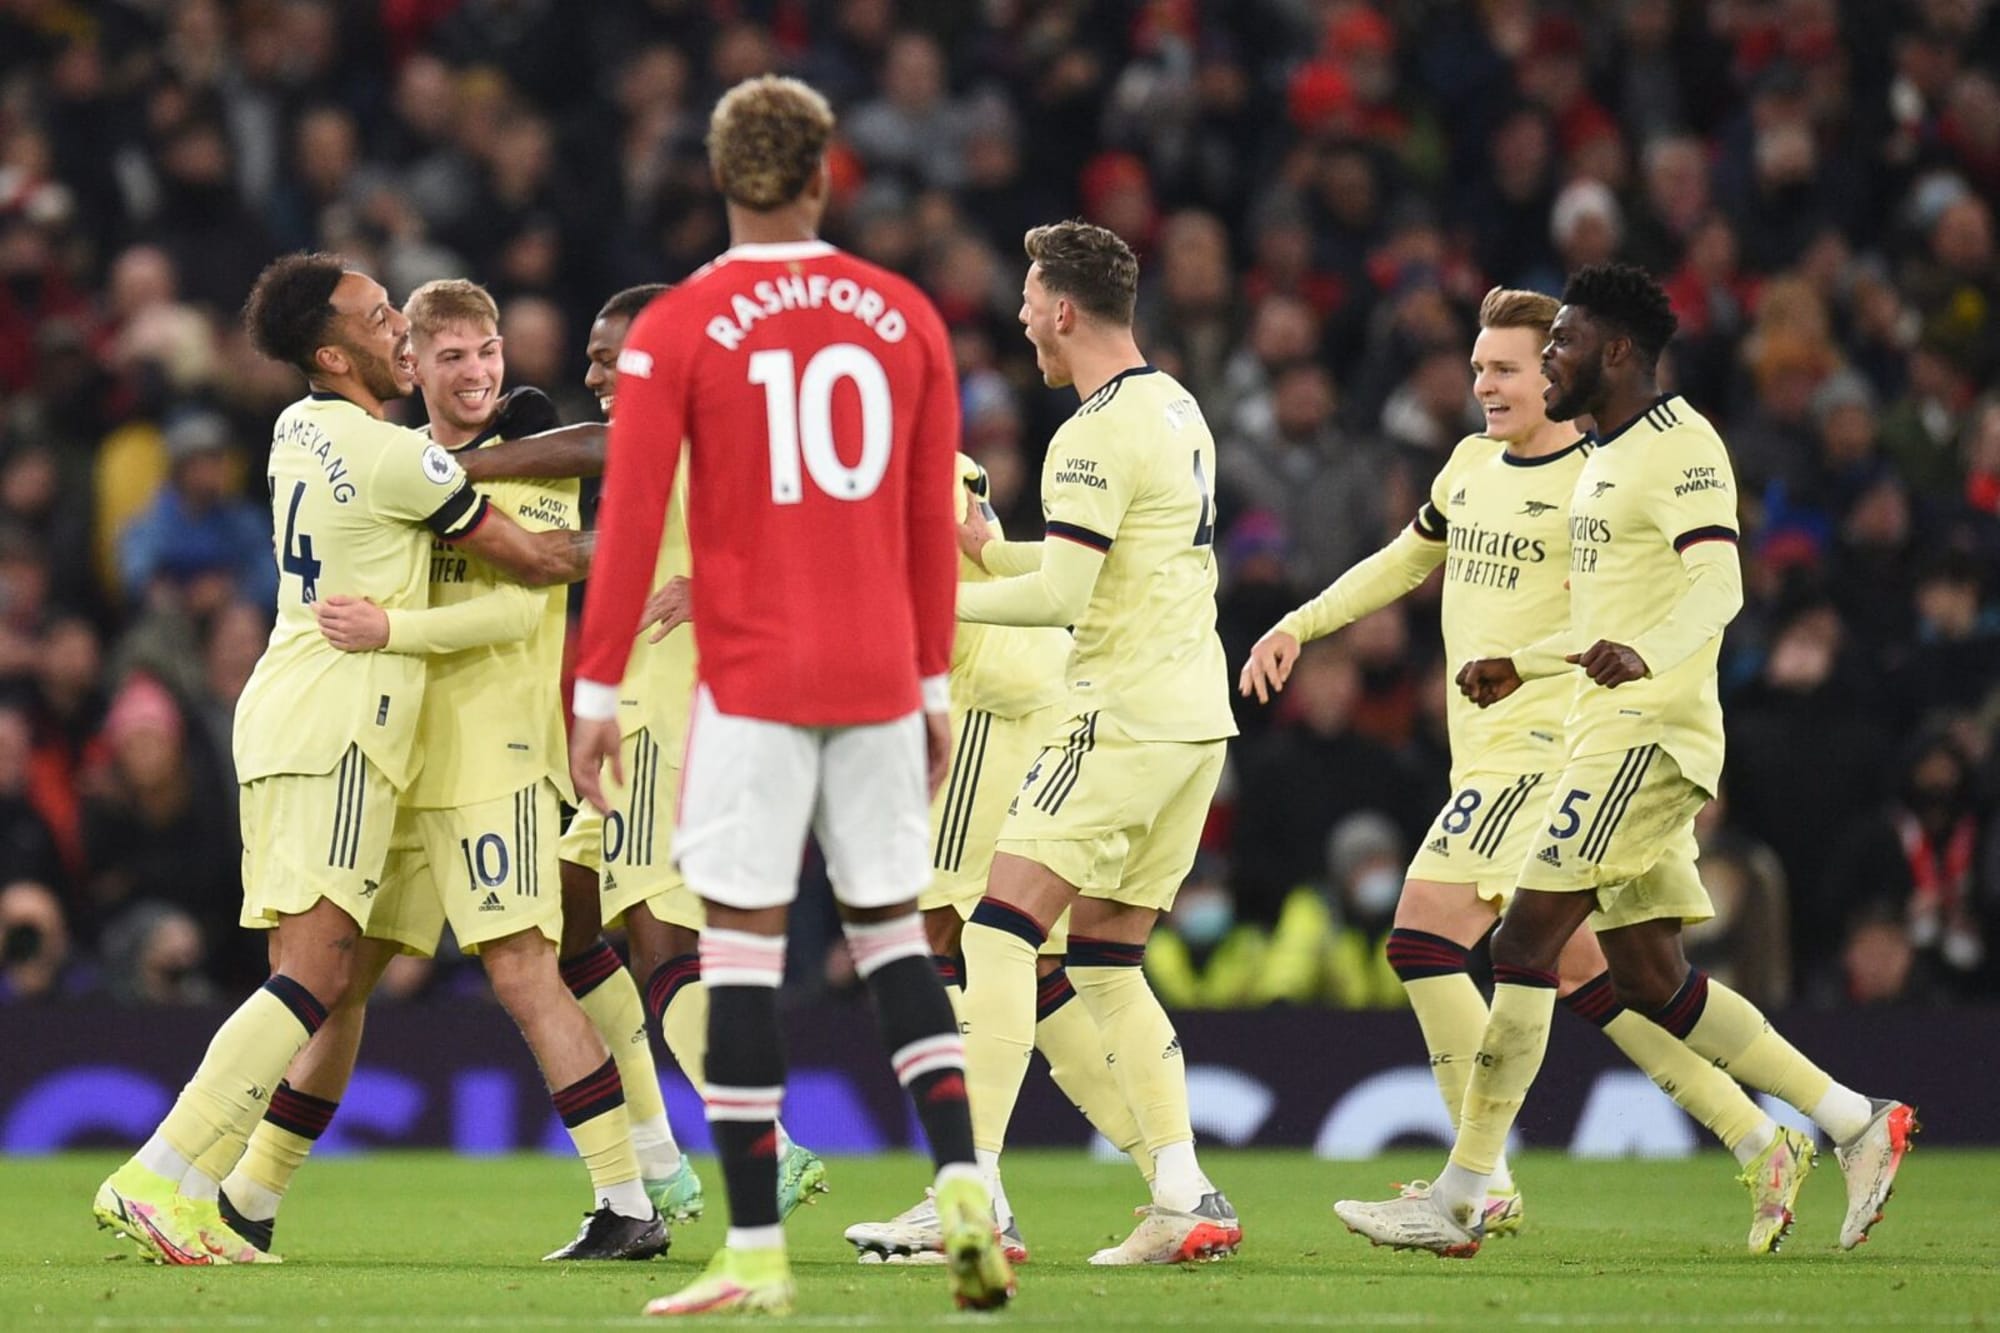 Man United vs Arsenal Preview How to Watch, Team News and Prediction